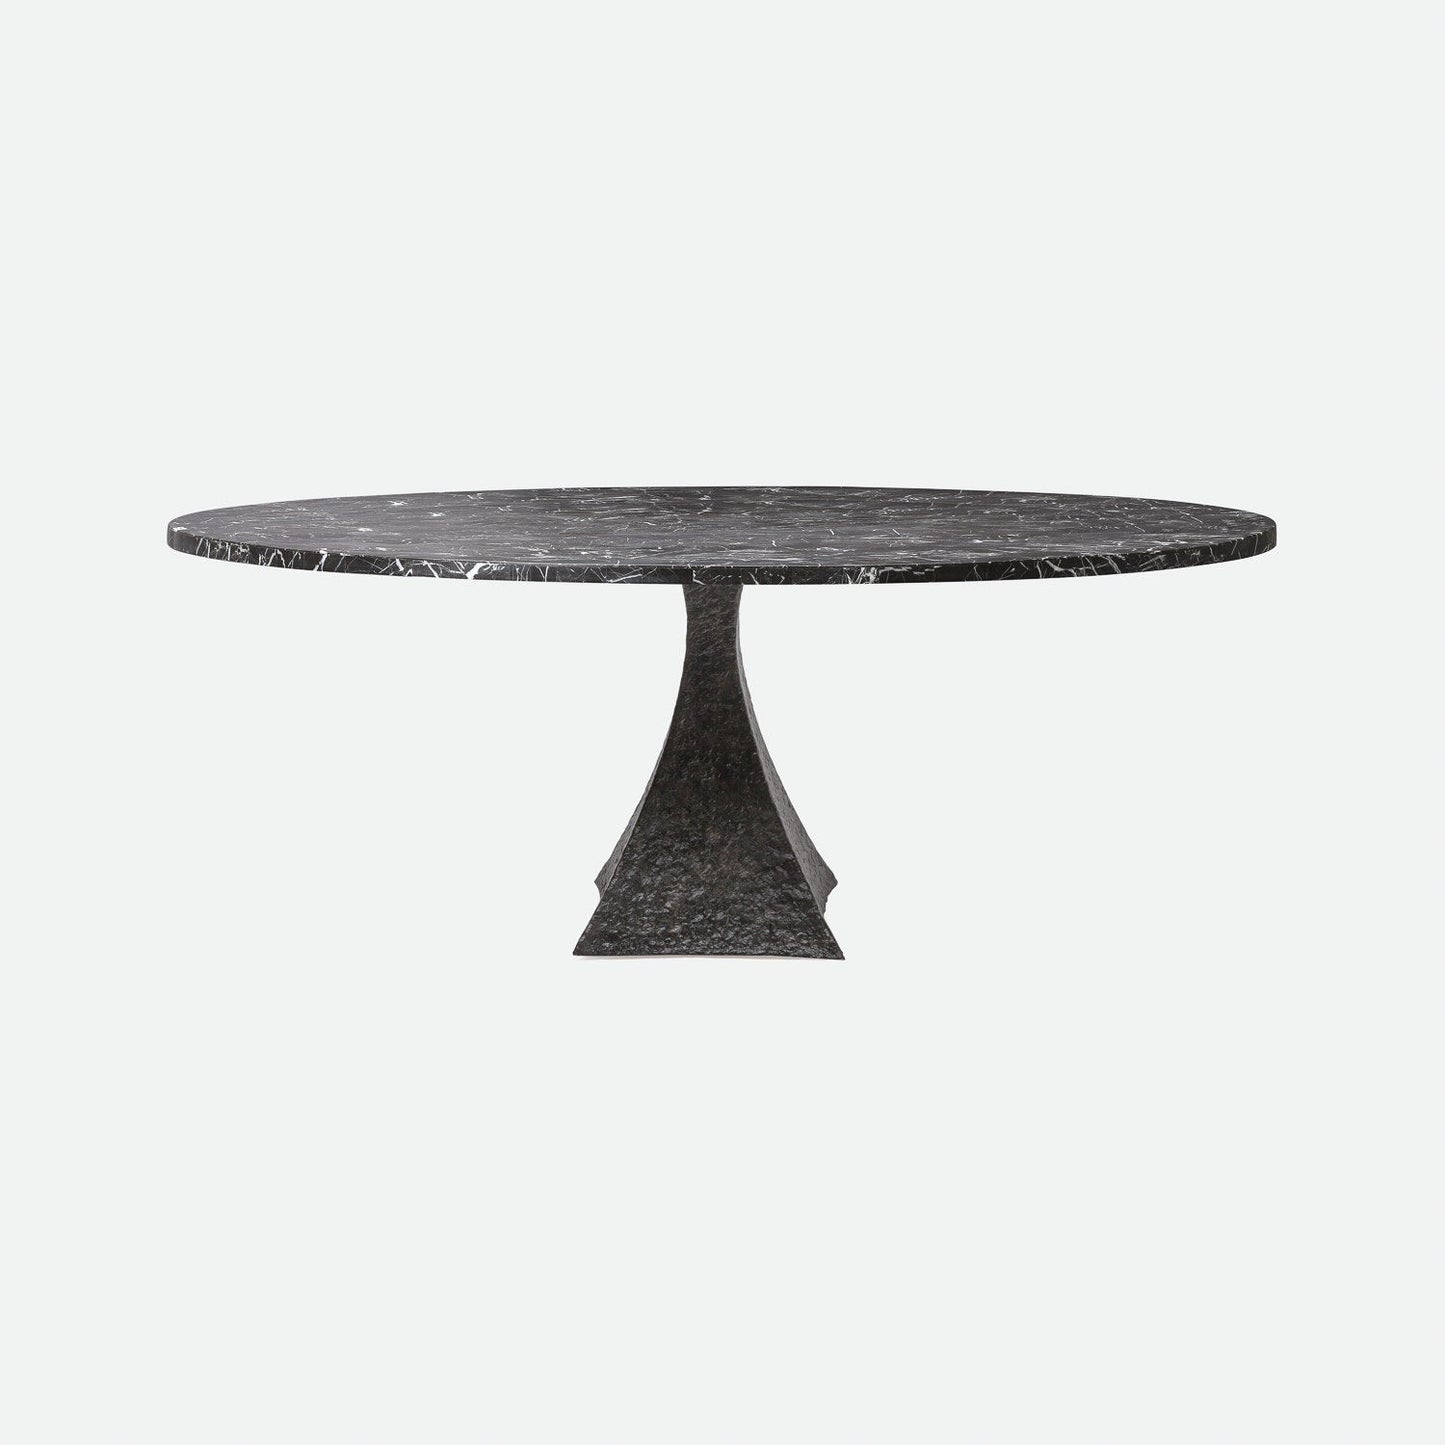 Made Goods Noor 72" x 30" Bumpy Black Iron Dinning Table With Round Nero Marble Table Top